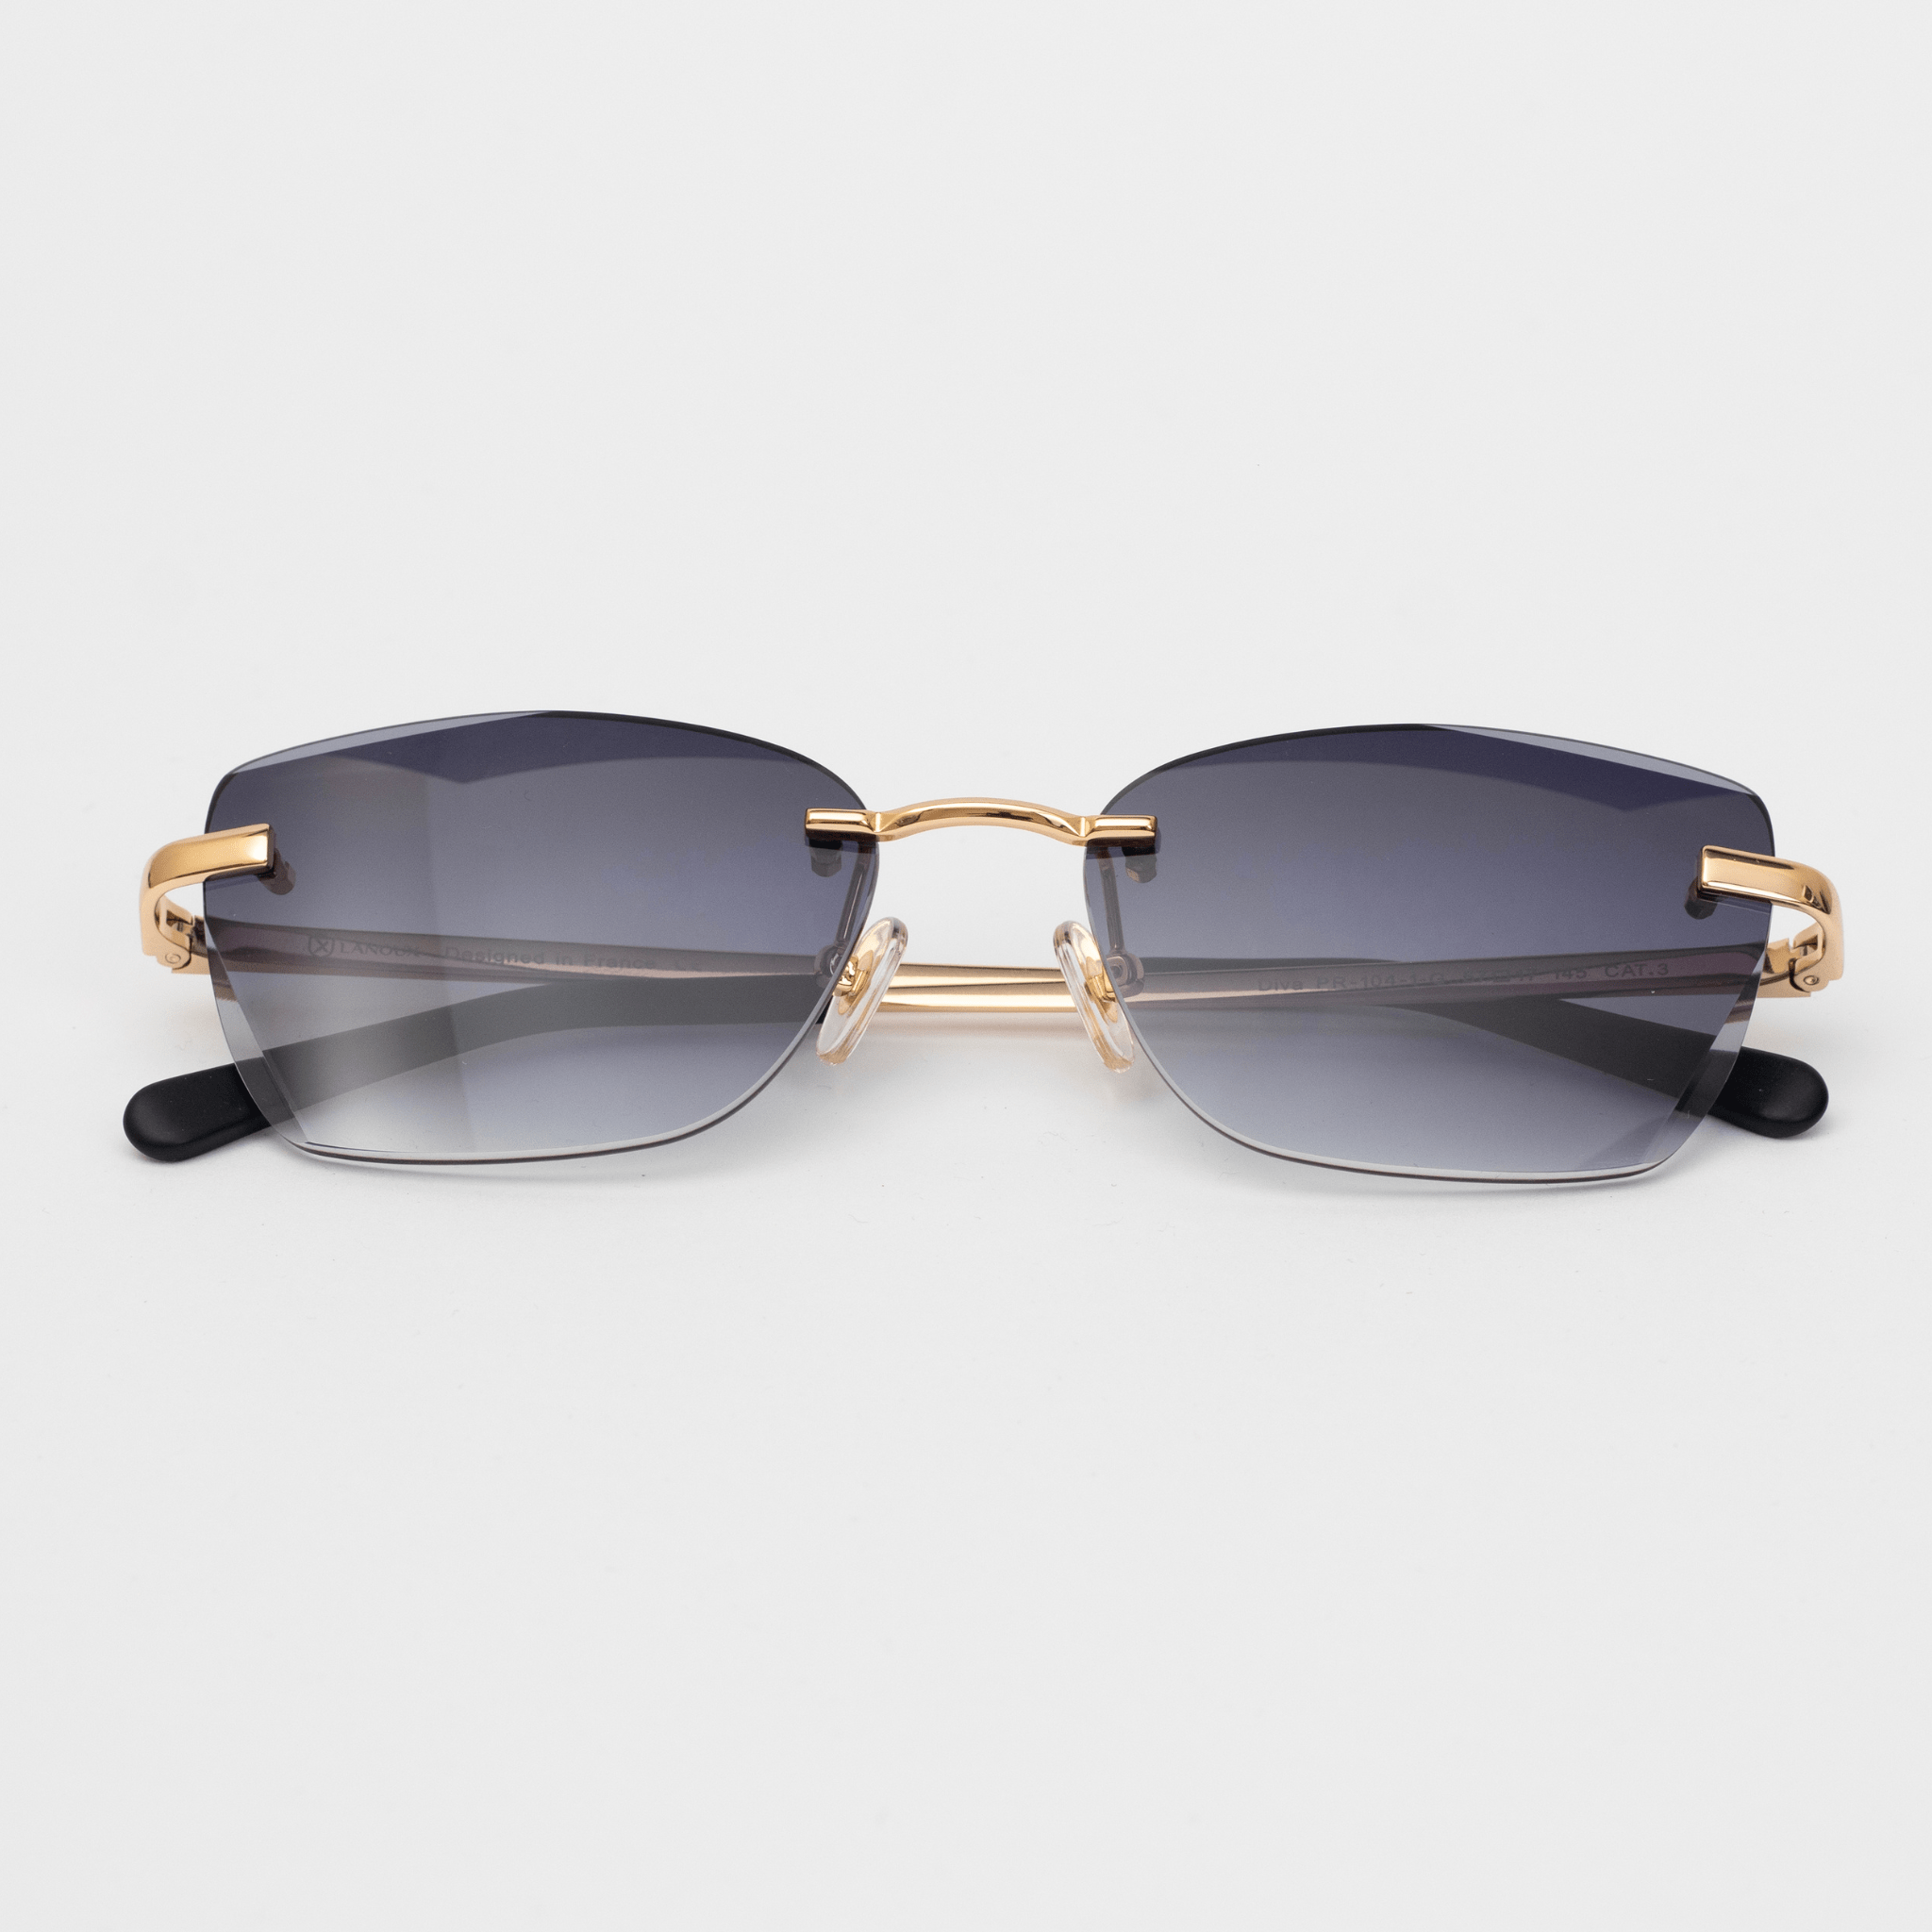 ophisticated 'Diva' model sunglasses featuring gradient grey lenses that provide a seamless transition from a darker top to a lighter bottom. The frame showcases 18k gold-plated hardware, offering an elegant contrast against the grey lenses, complete with comfortable black arm ends for a secure fit